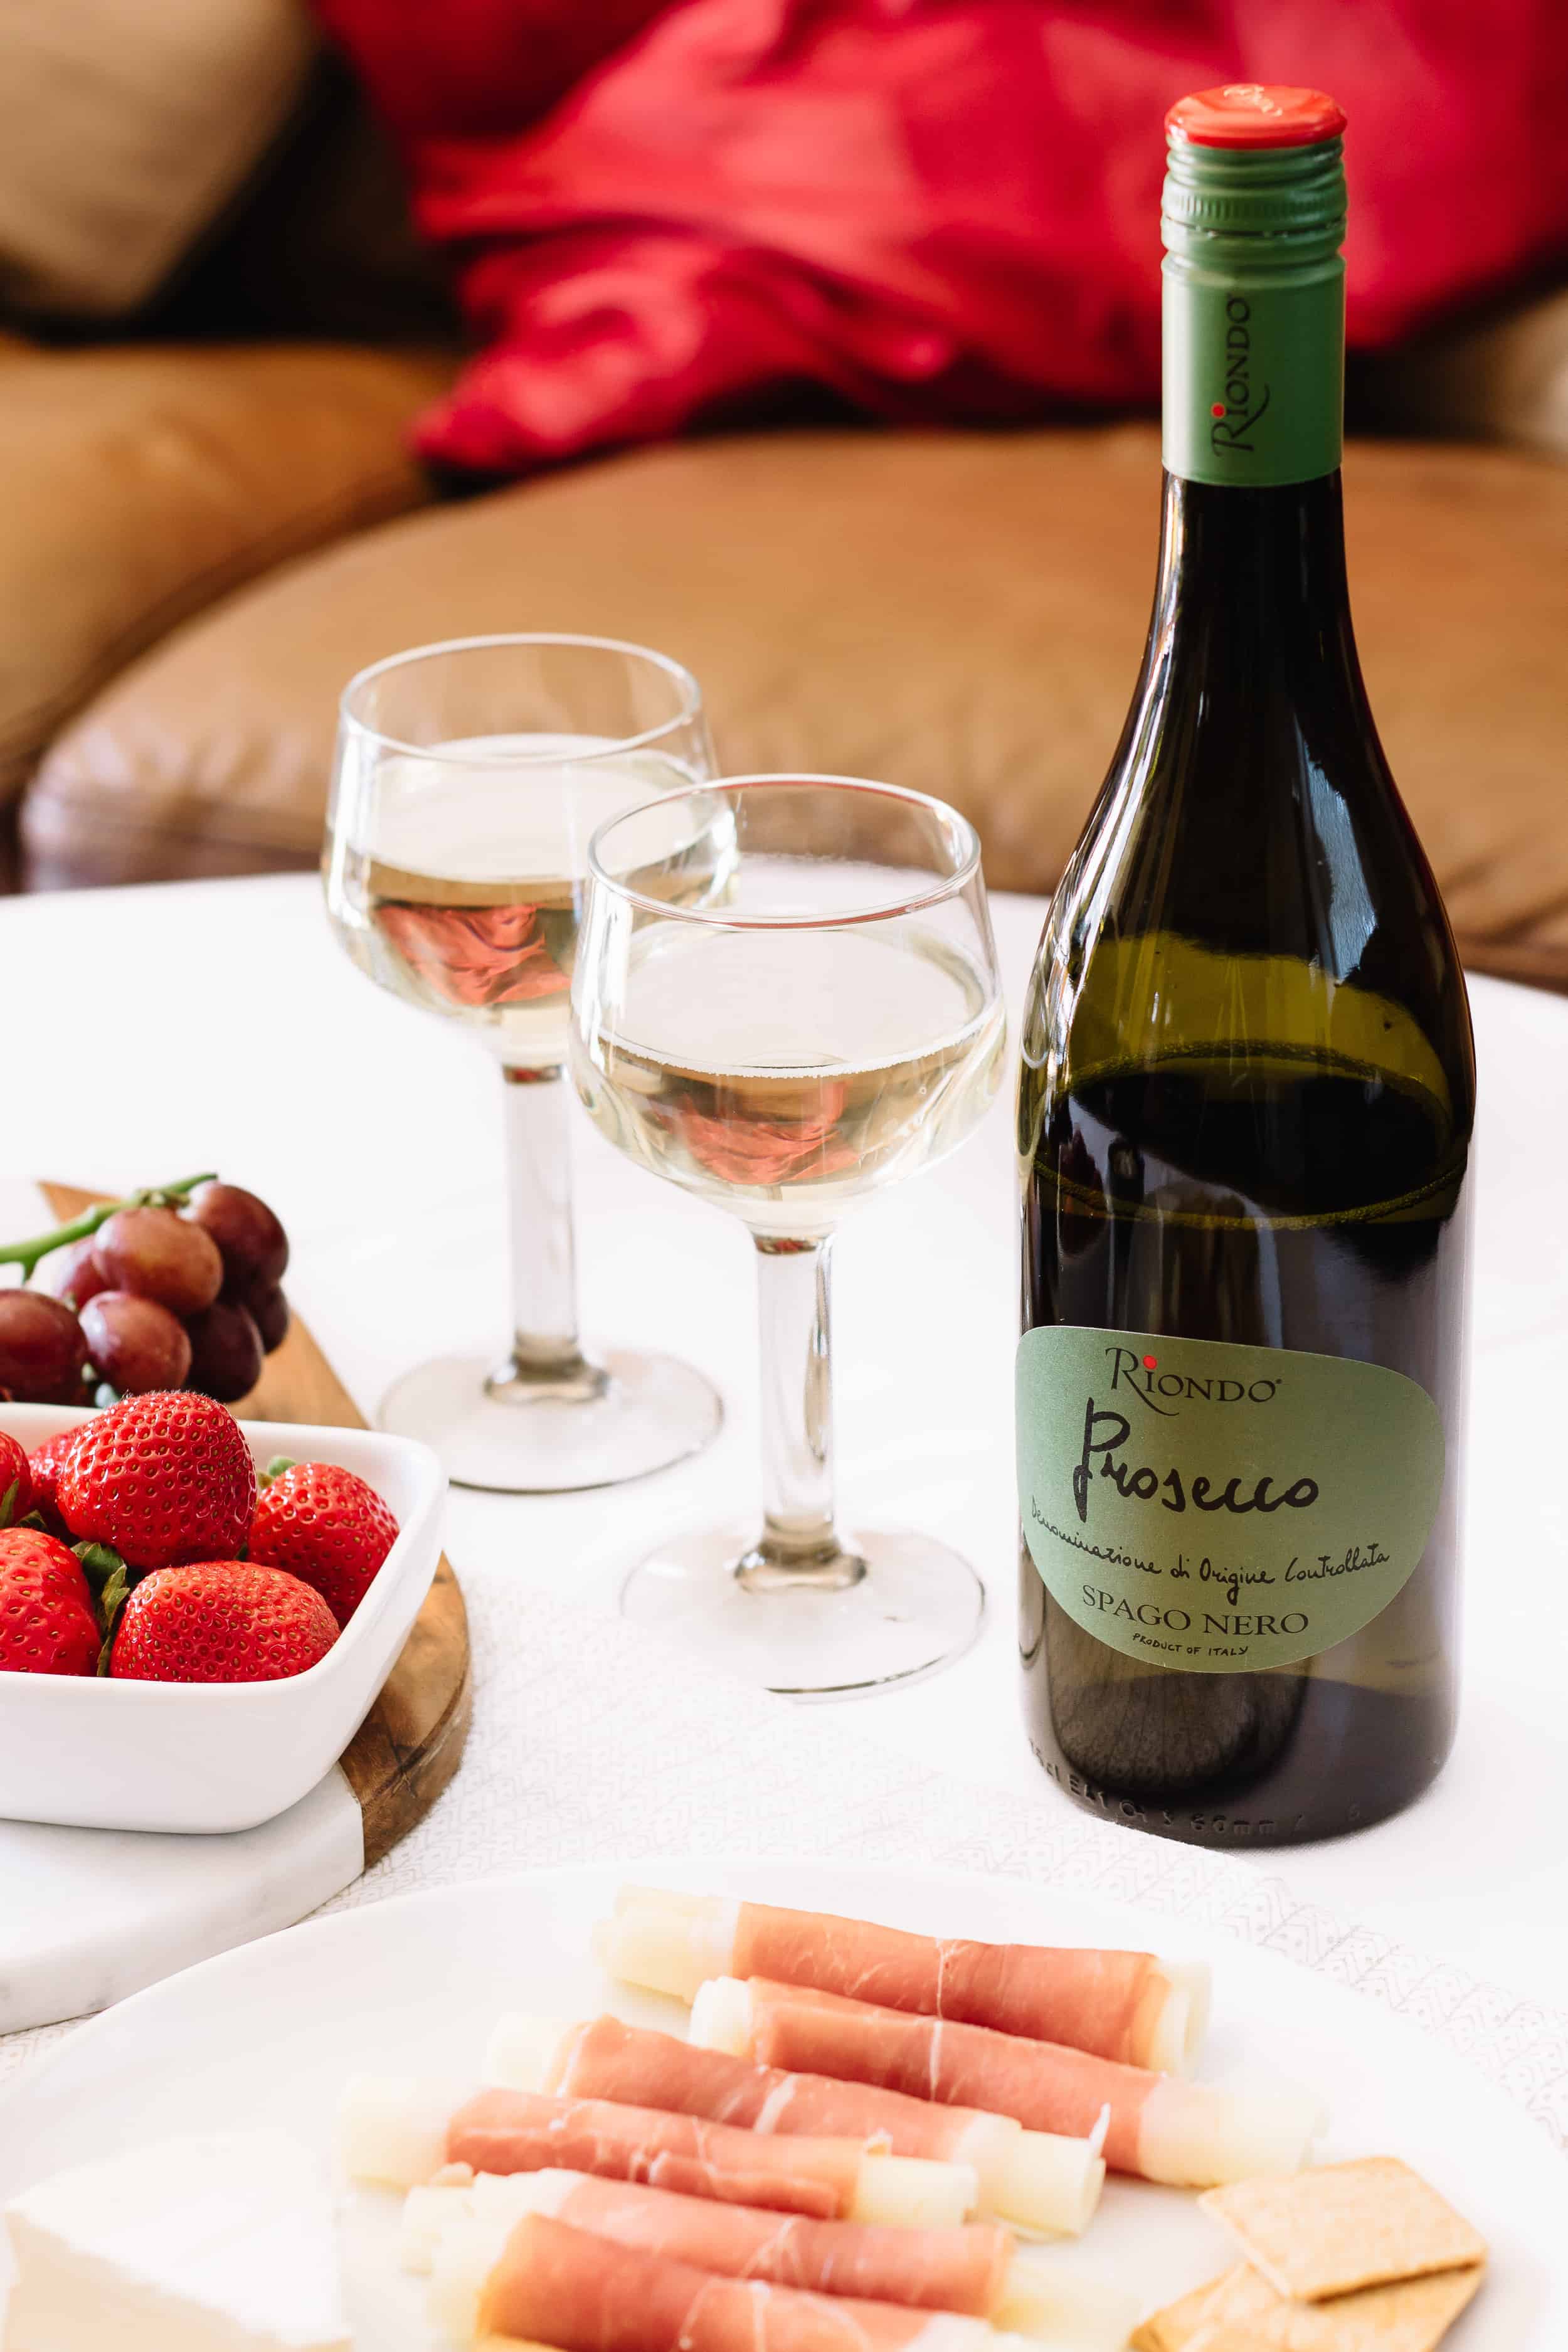 Create your own happy hour at home and enjoy great wine and food alone or with friends. Here are 4 Simple Tips for Hosting Happy Hour at Home. // #RiondoProsecco #ItalianForsummer #ad